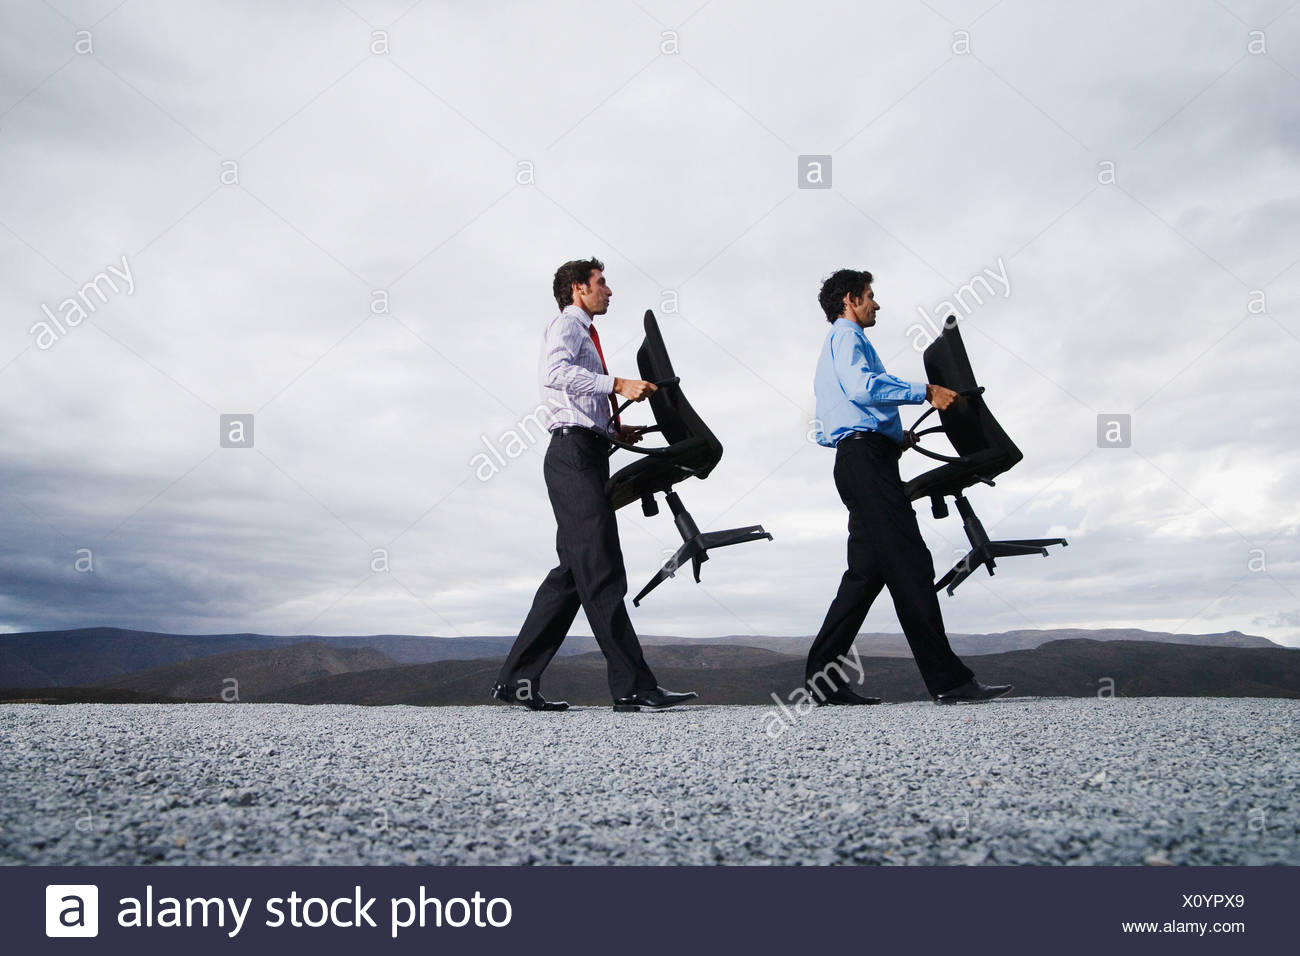 two-men-carrying-office-chairs-outdoors-X0YPX9.jpg